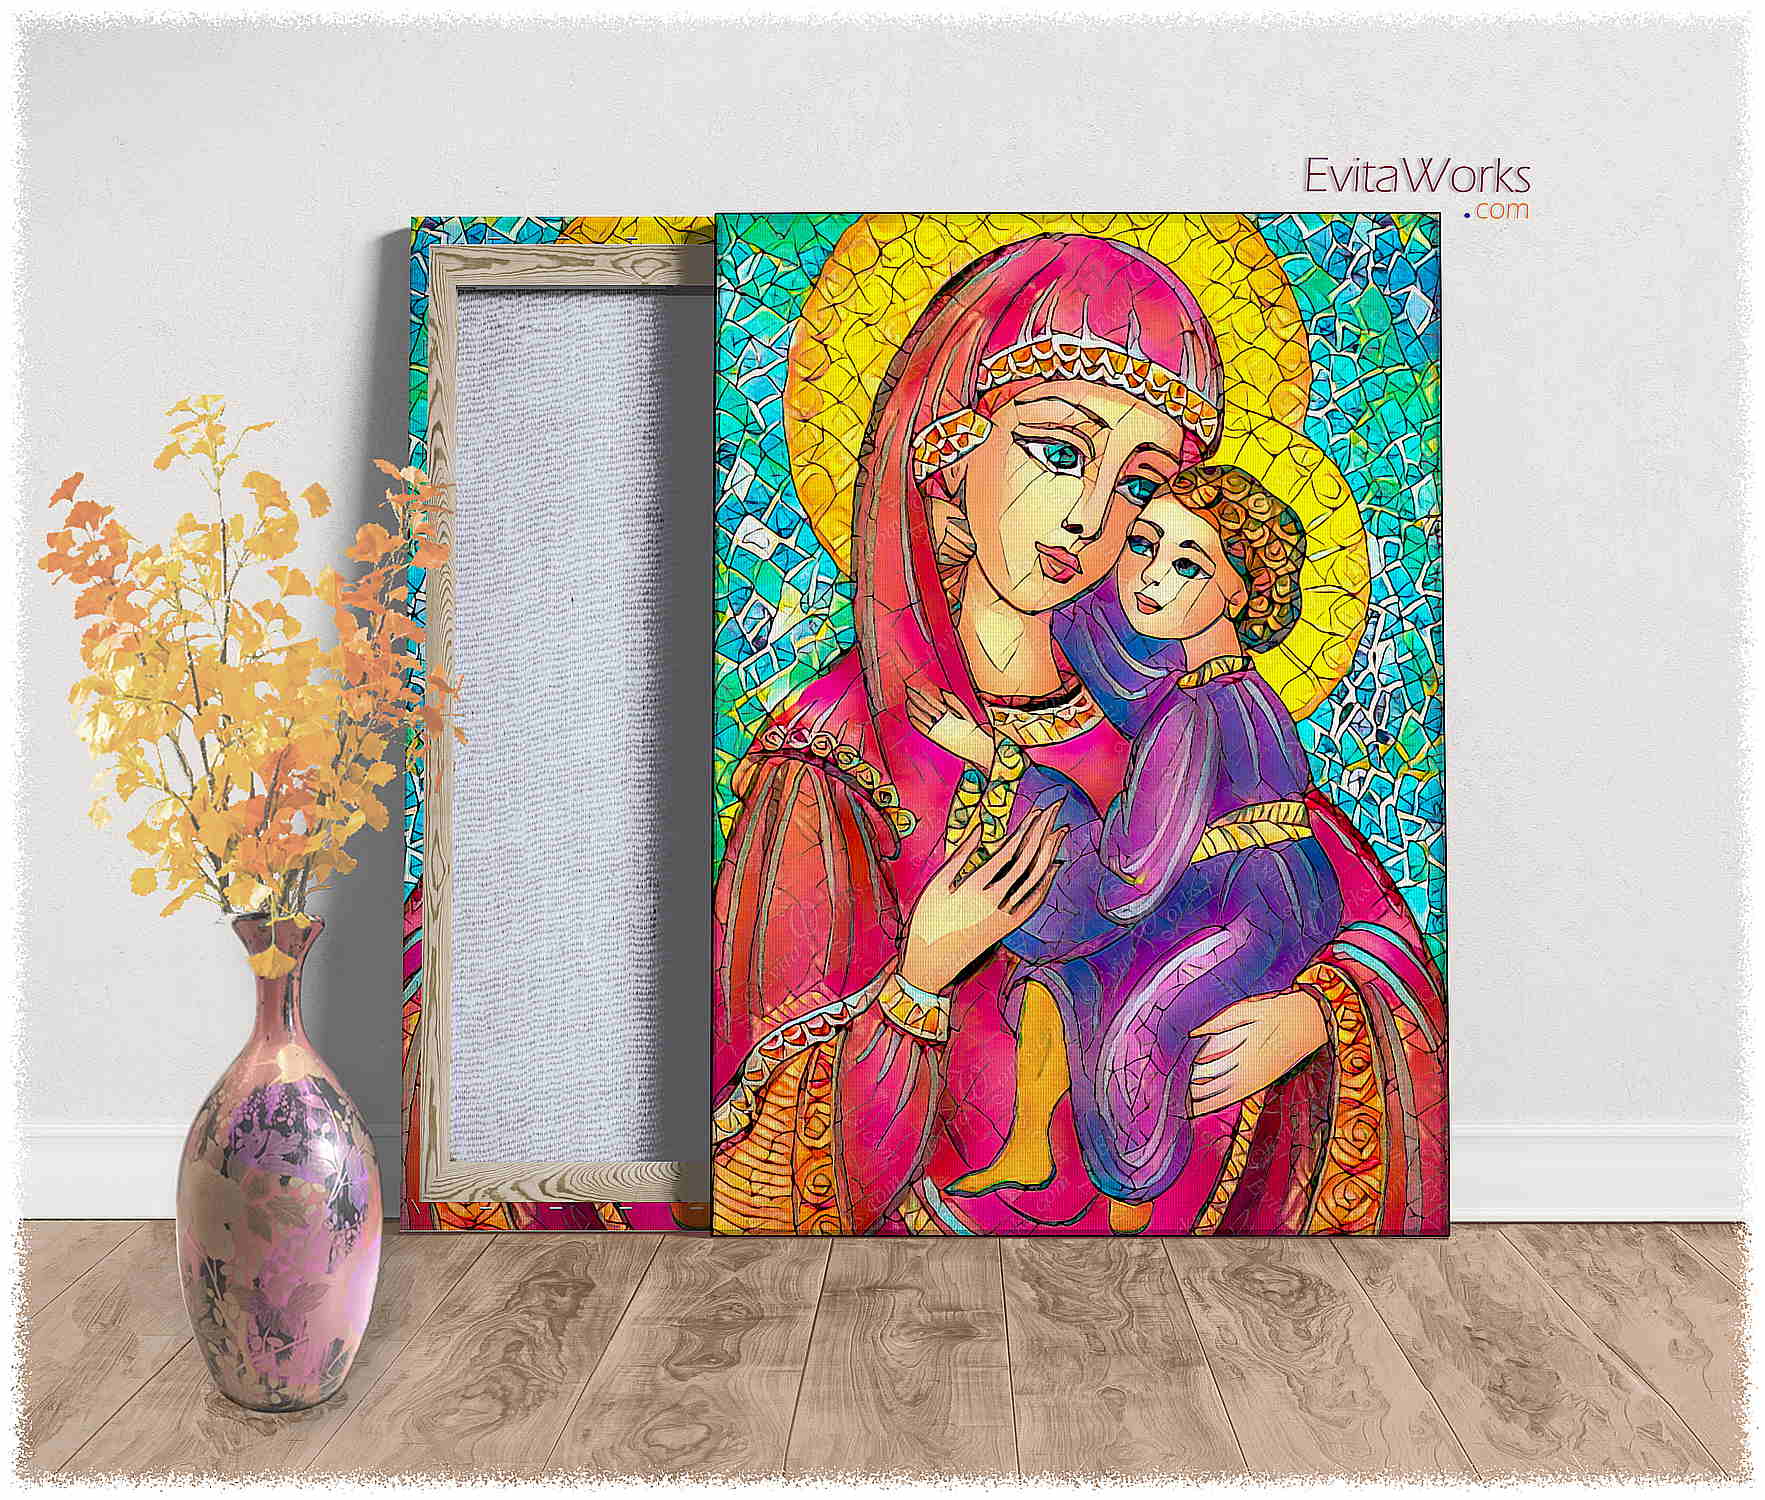 Hit to learn about "Green Ray Madonna, Mother and Child" on canvases